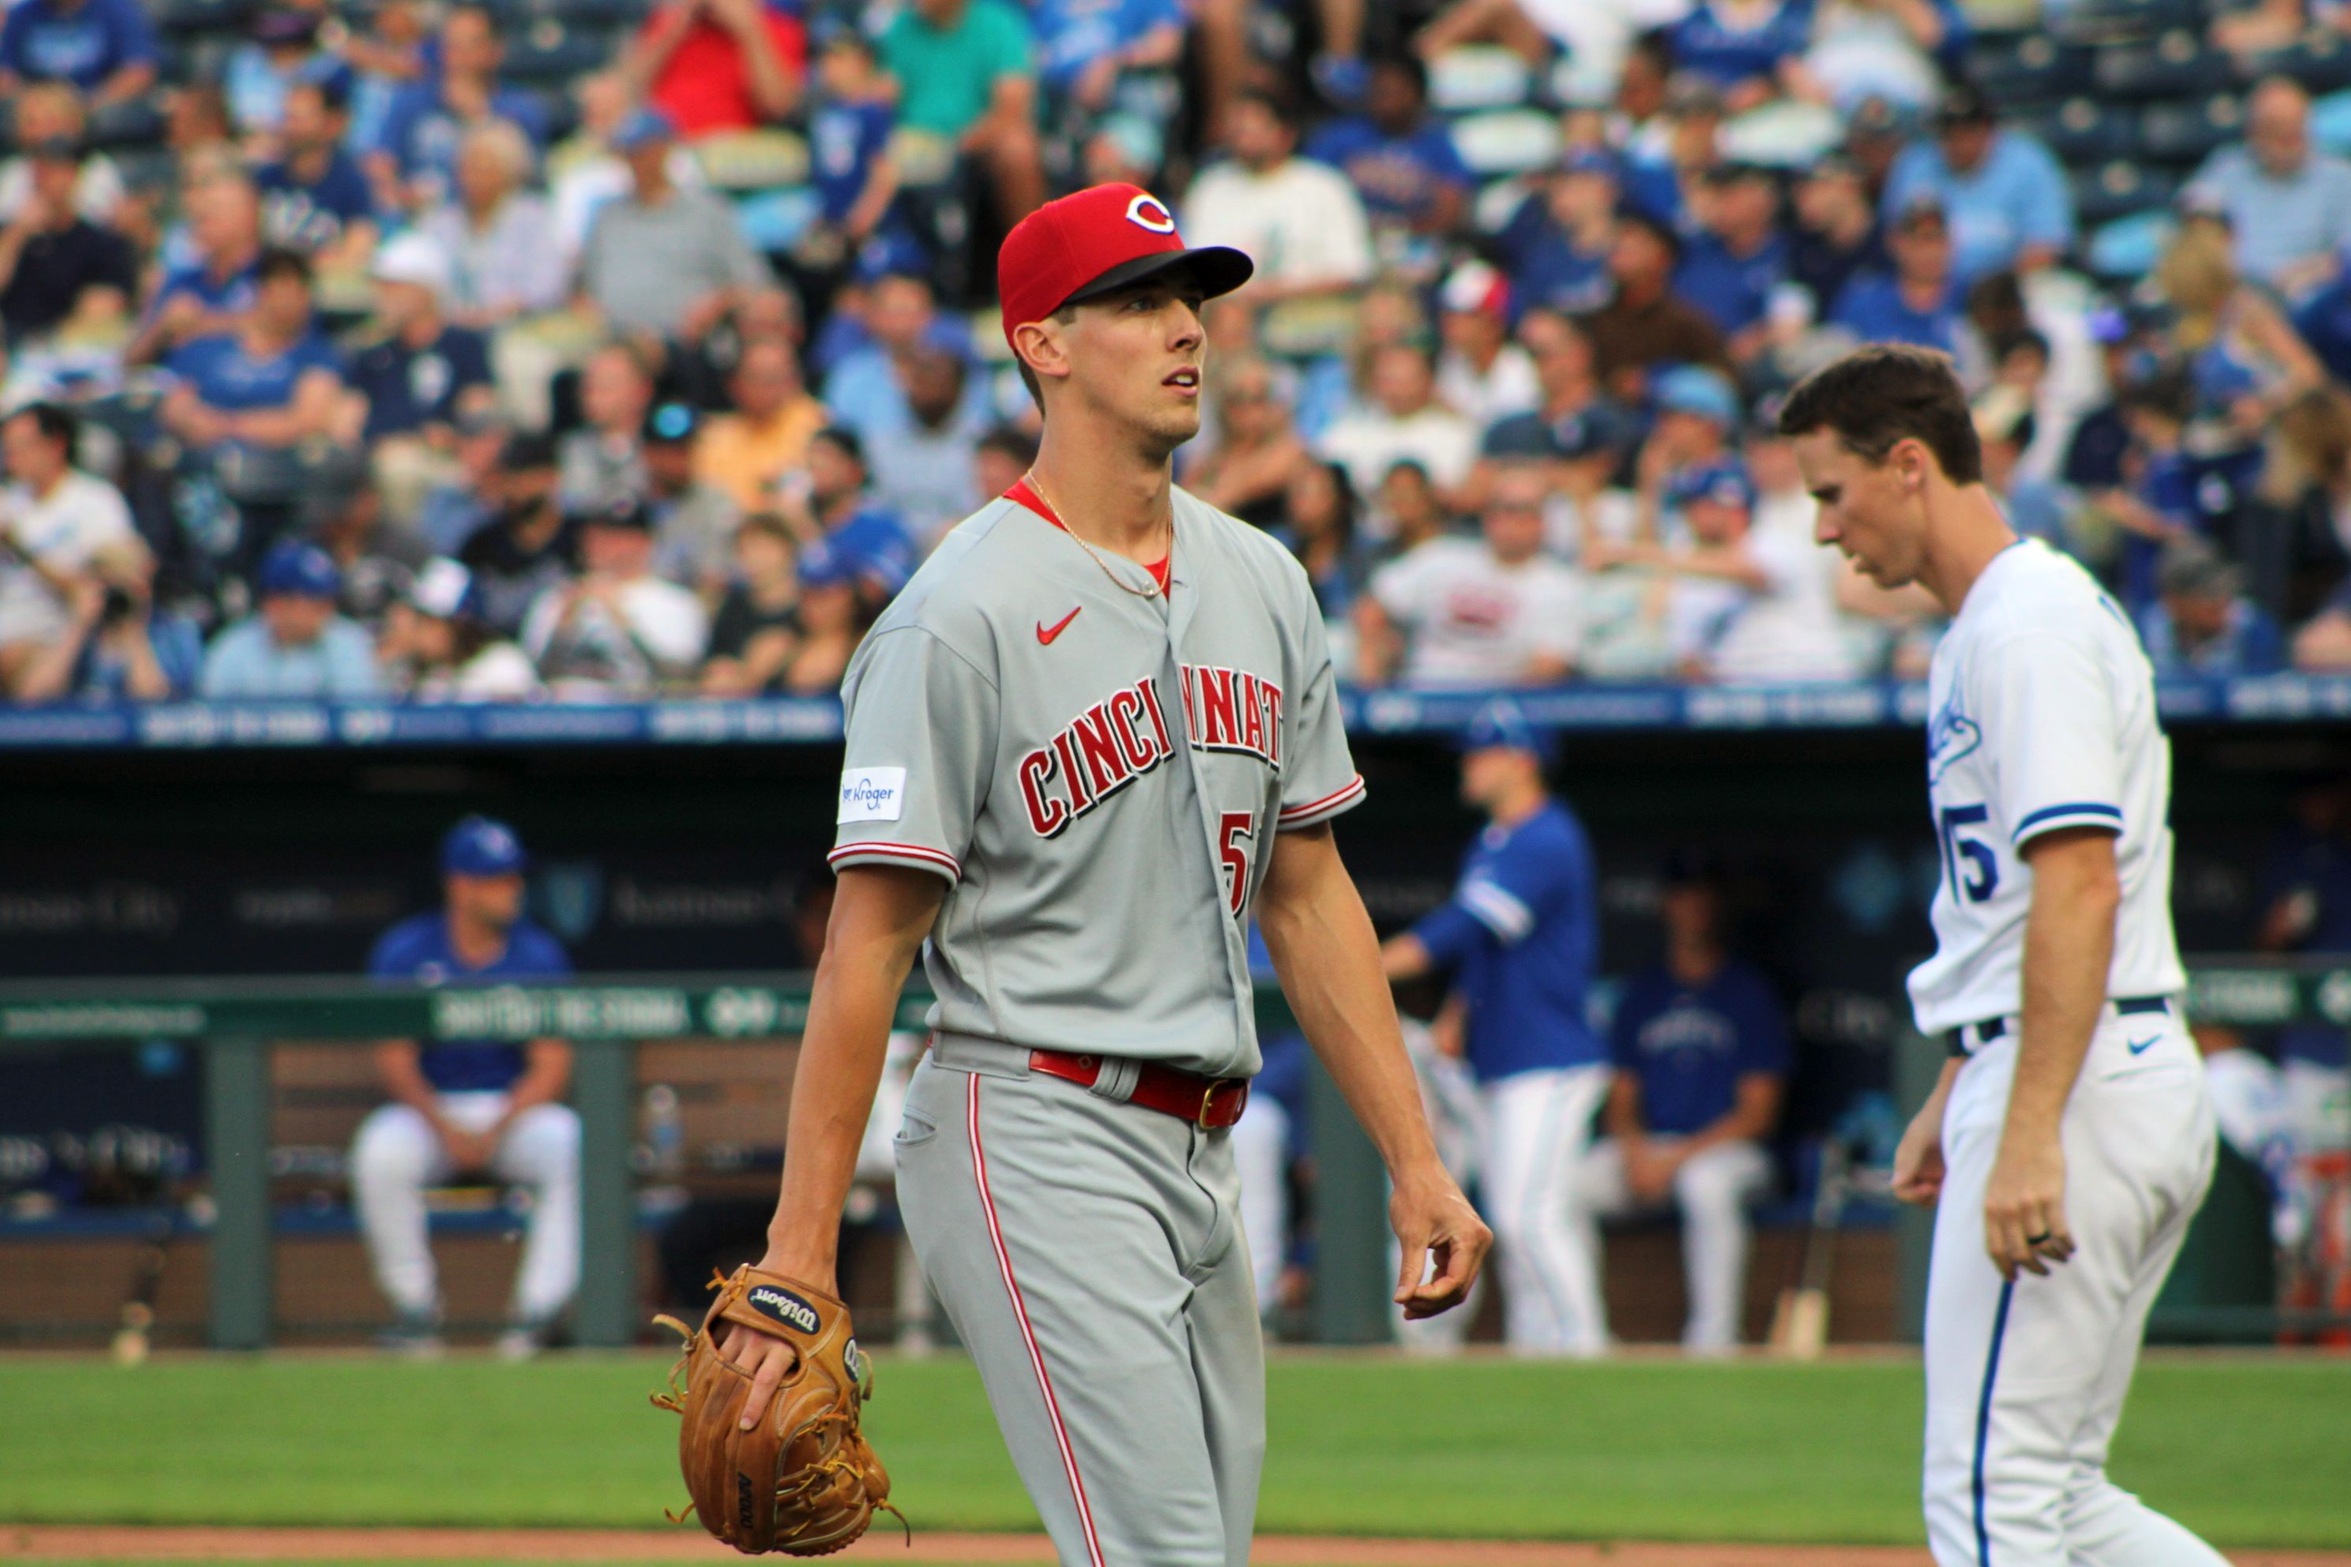 The Reds' Brandon Williamson comes off the mound during his outing in Kansas City on June 13.